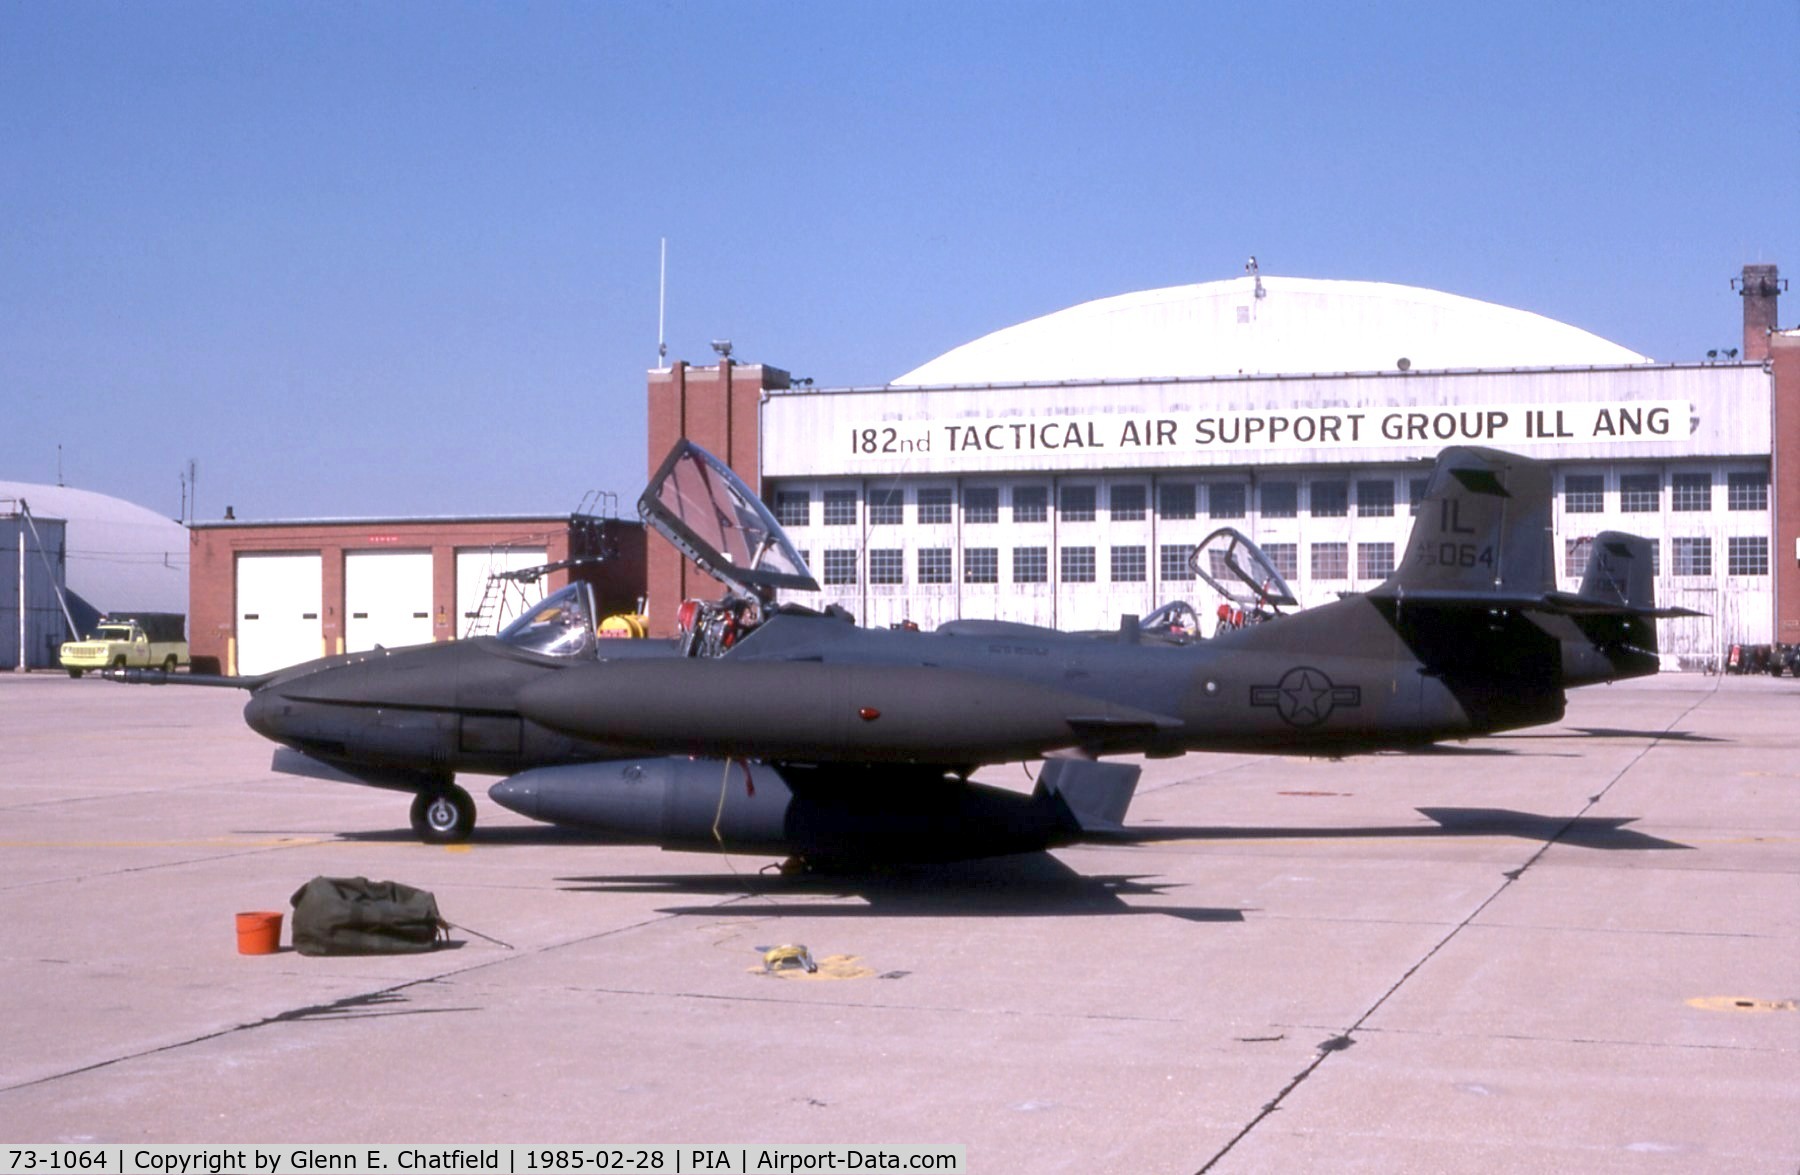 73-1064, 1973 Cessna OA-37B Dragonfly C/N 43427, OA-37B with the Illinois ANG